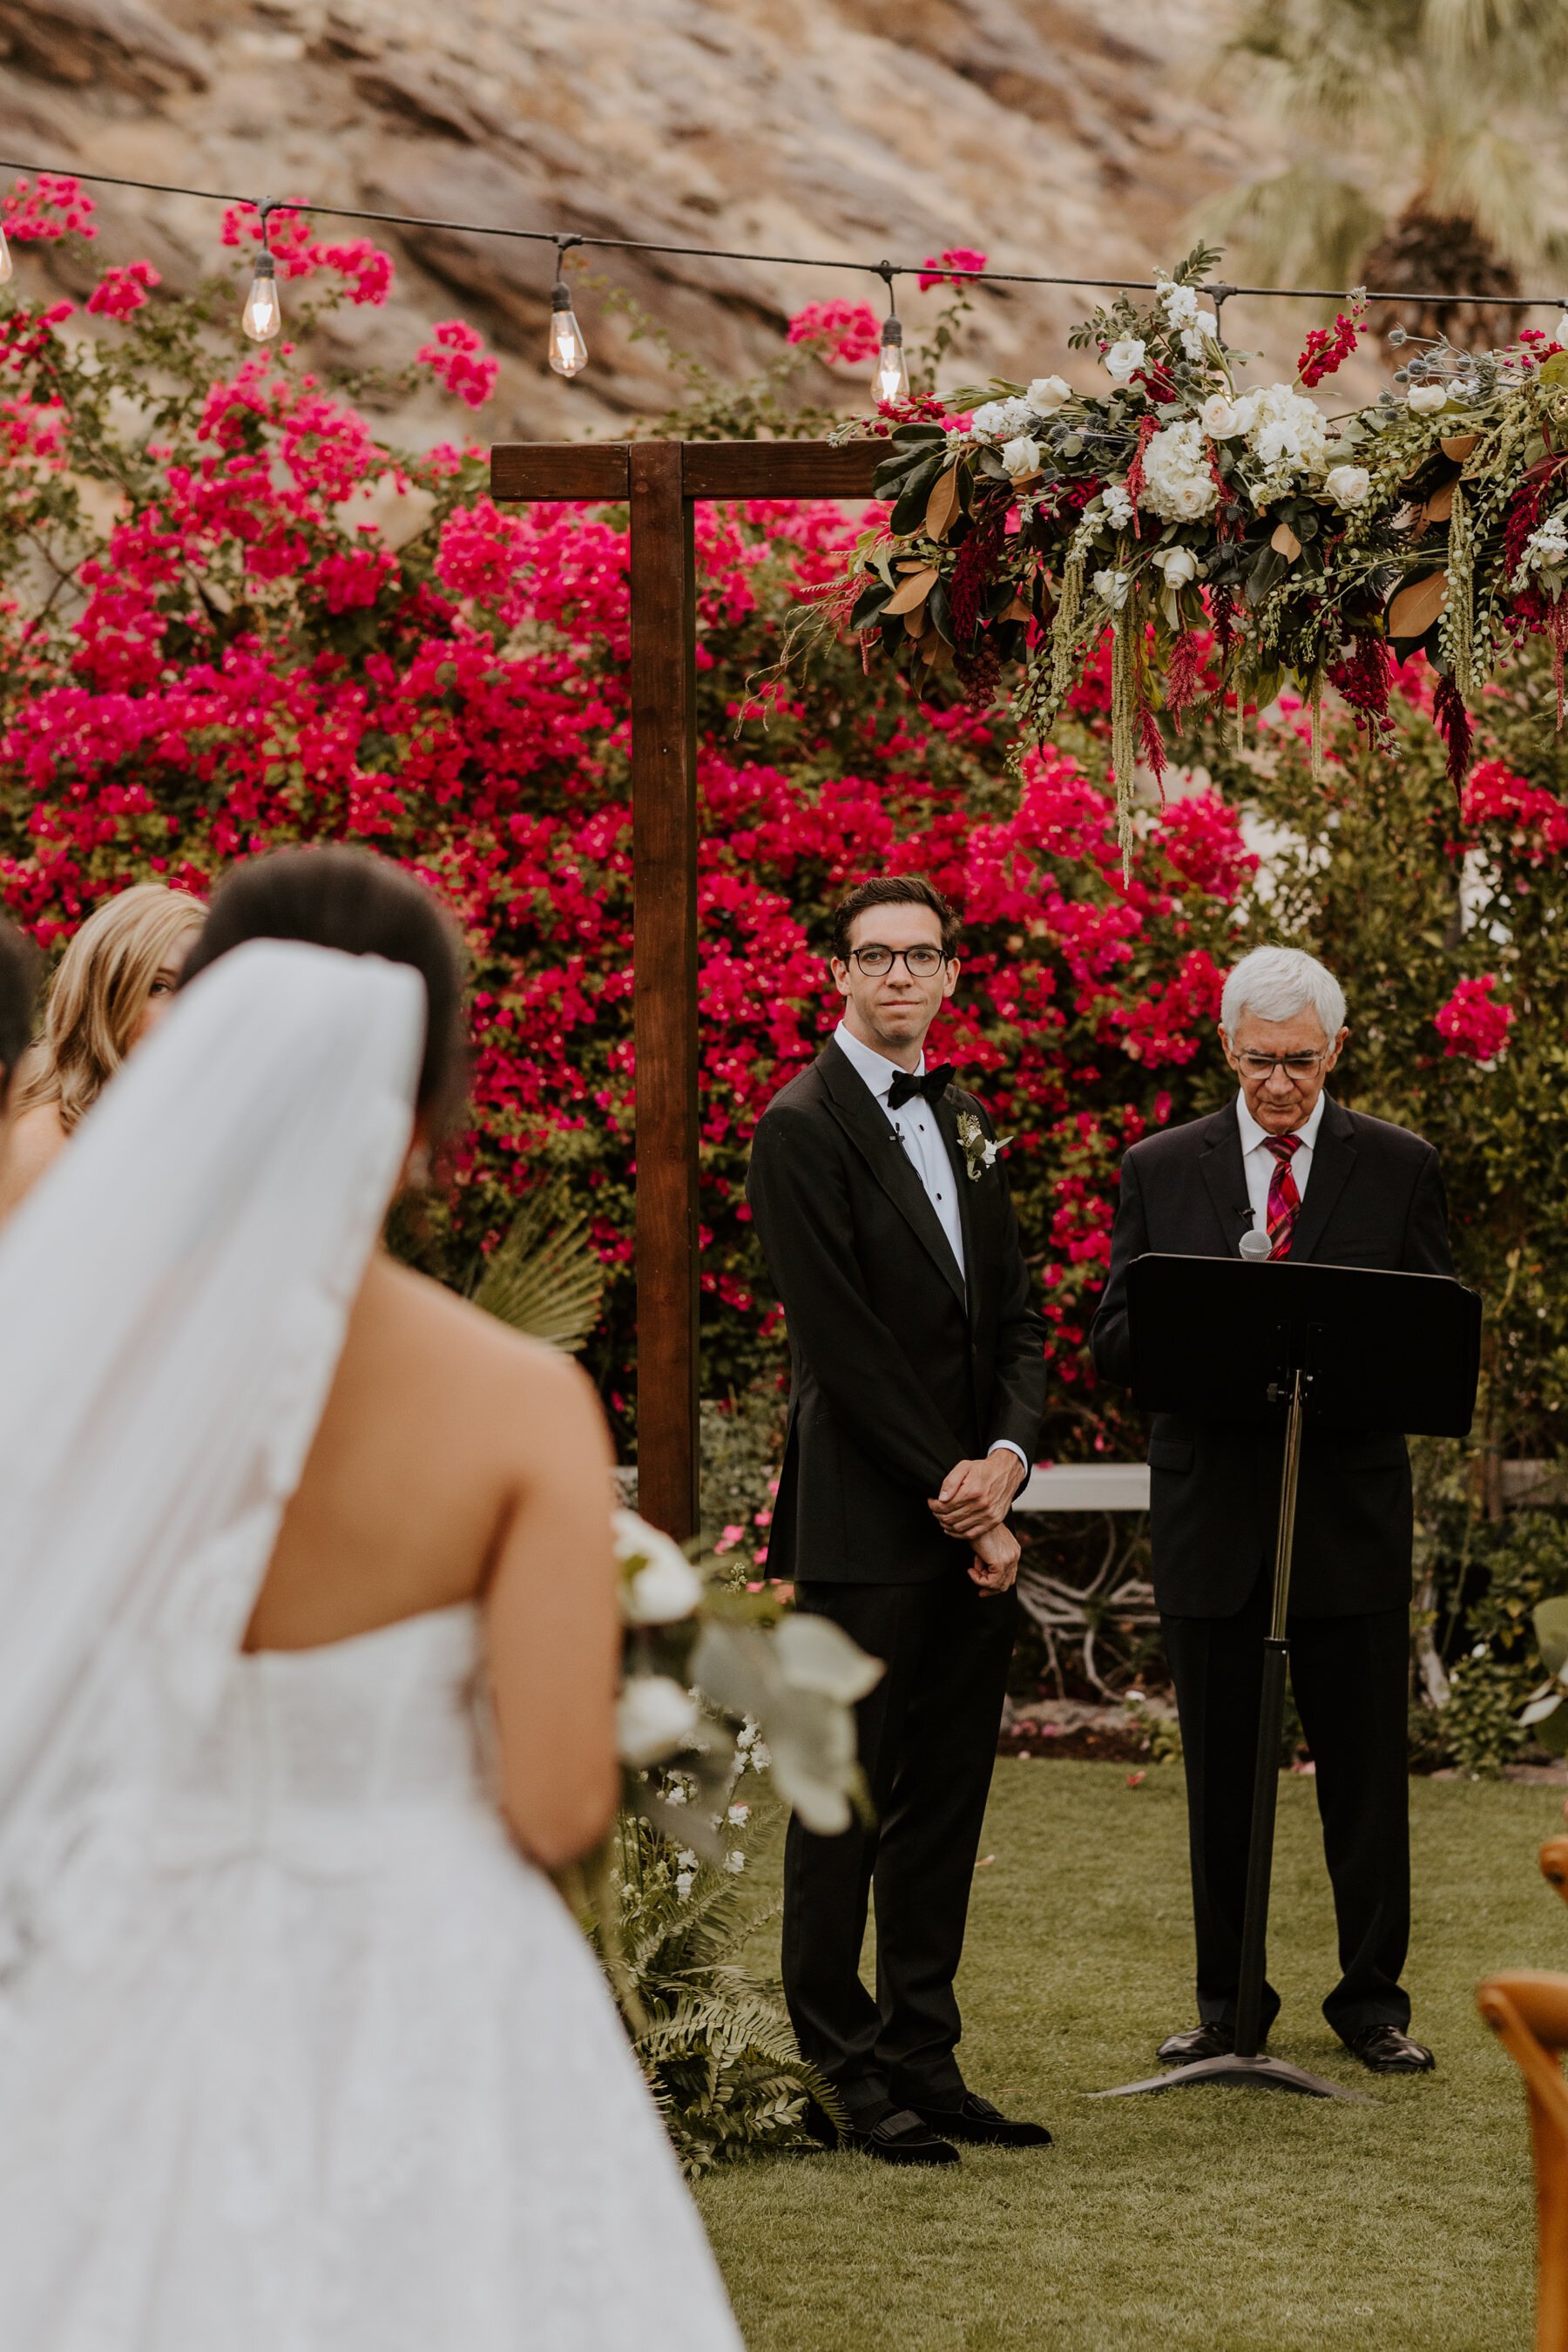 Groom seeing Bride for the first time, Spencer’s Restaurant Palm Springs Wedding, Palm Springs Wedding Photographer | Tida Svy Photo